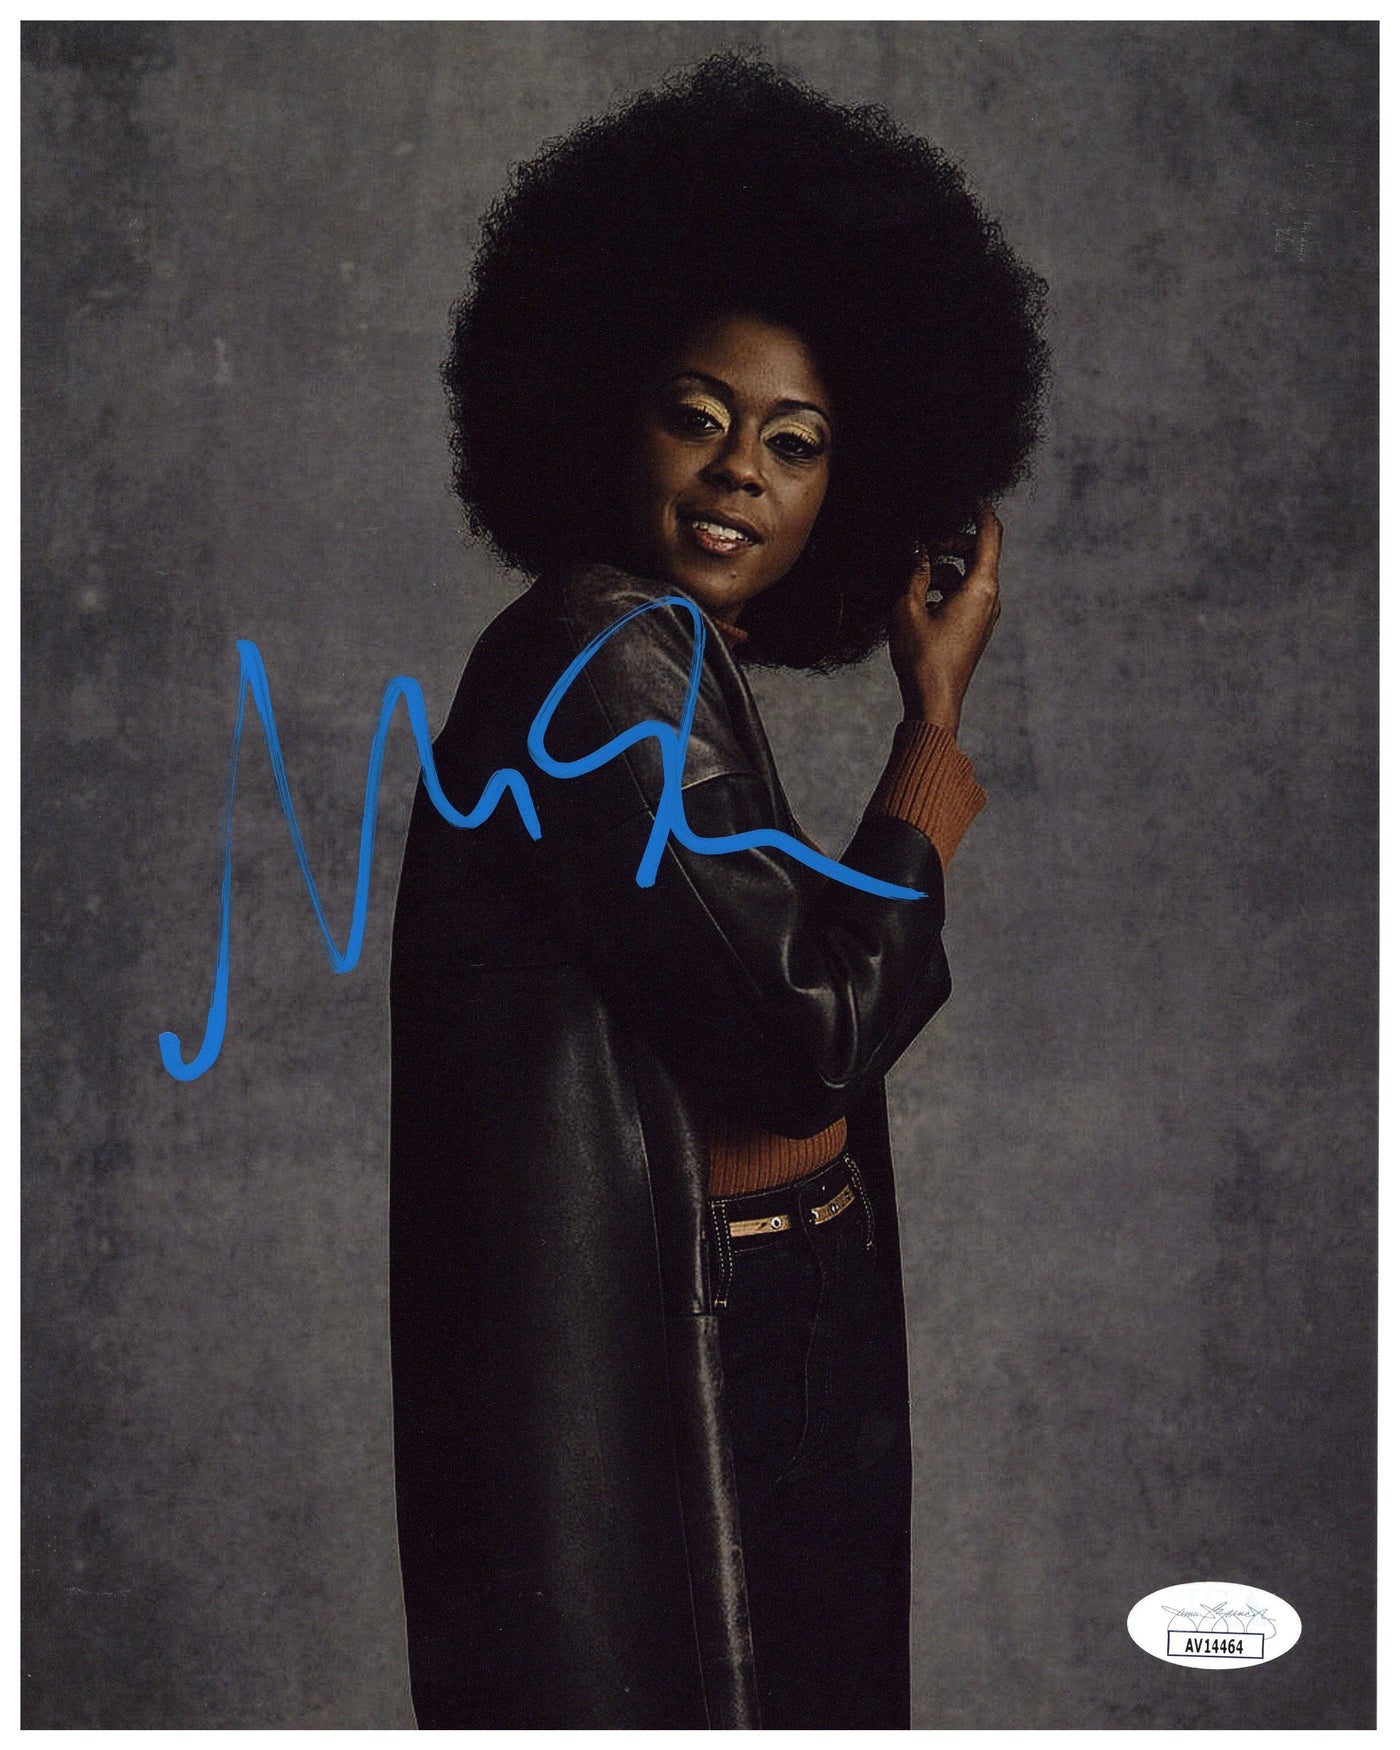 Moses Ingram Signed 8x10 Photo The Queen's Gambit Autographed JSA COA